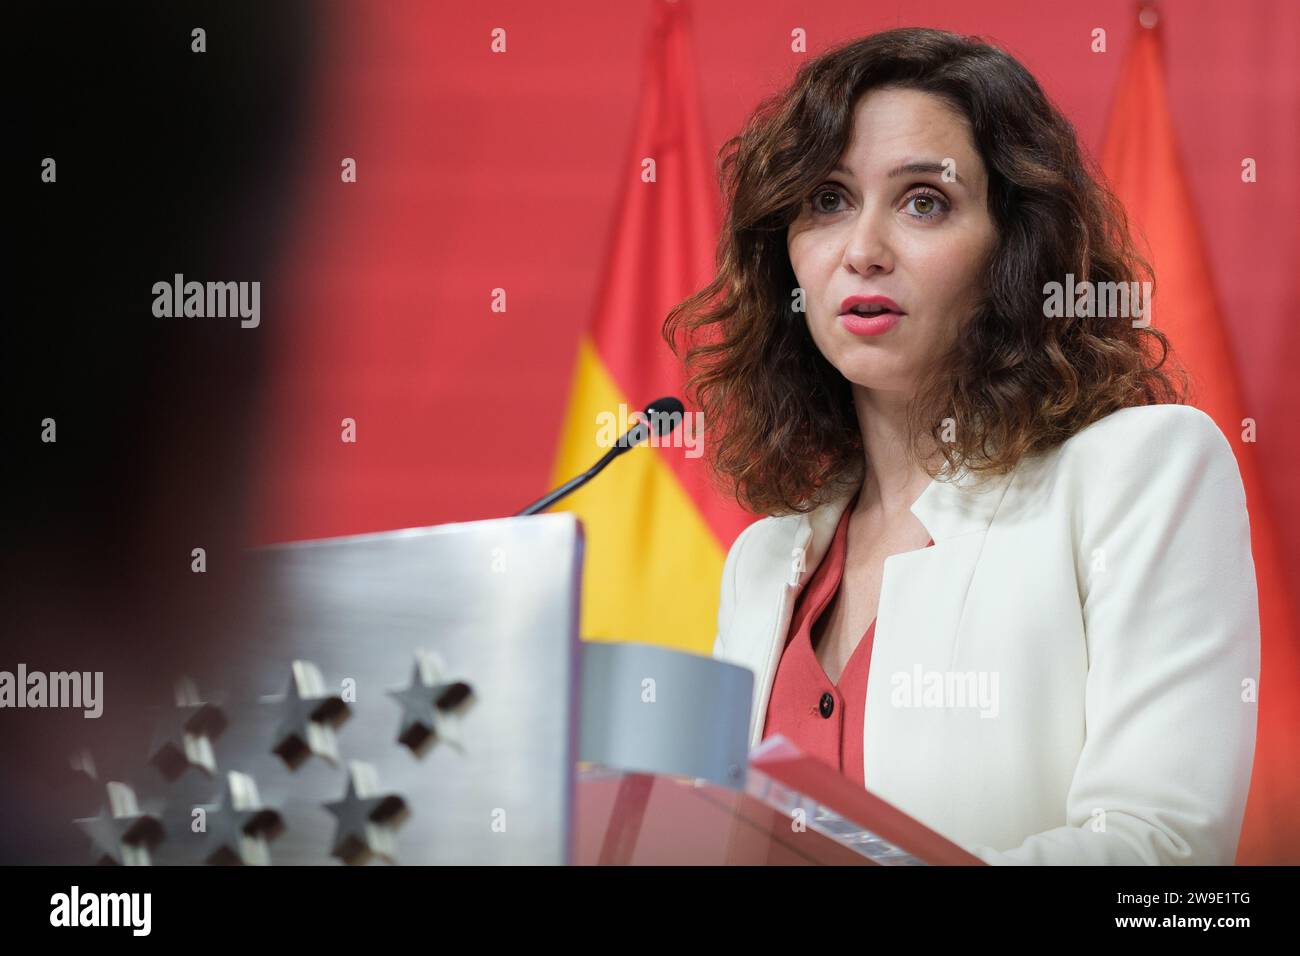 he president of the Community of Madrid, Isabel Diaz Ayuso, during a press conference after a meeting of the Governing Council of the Community of Mad Stock Photo